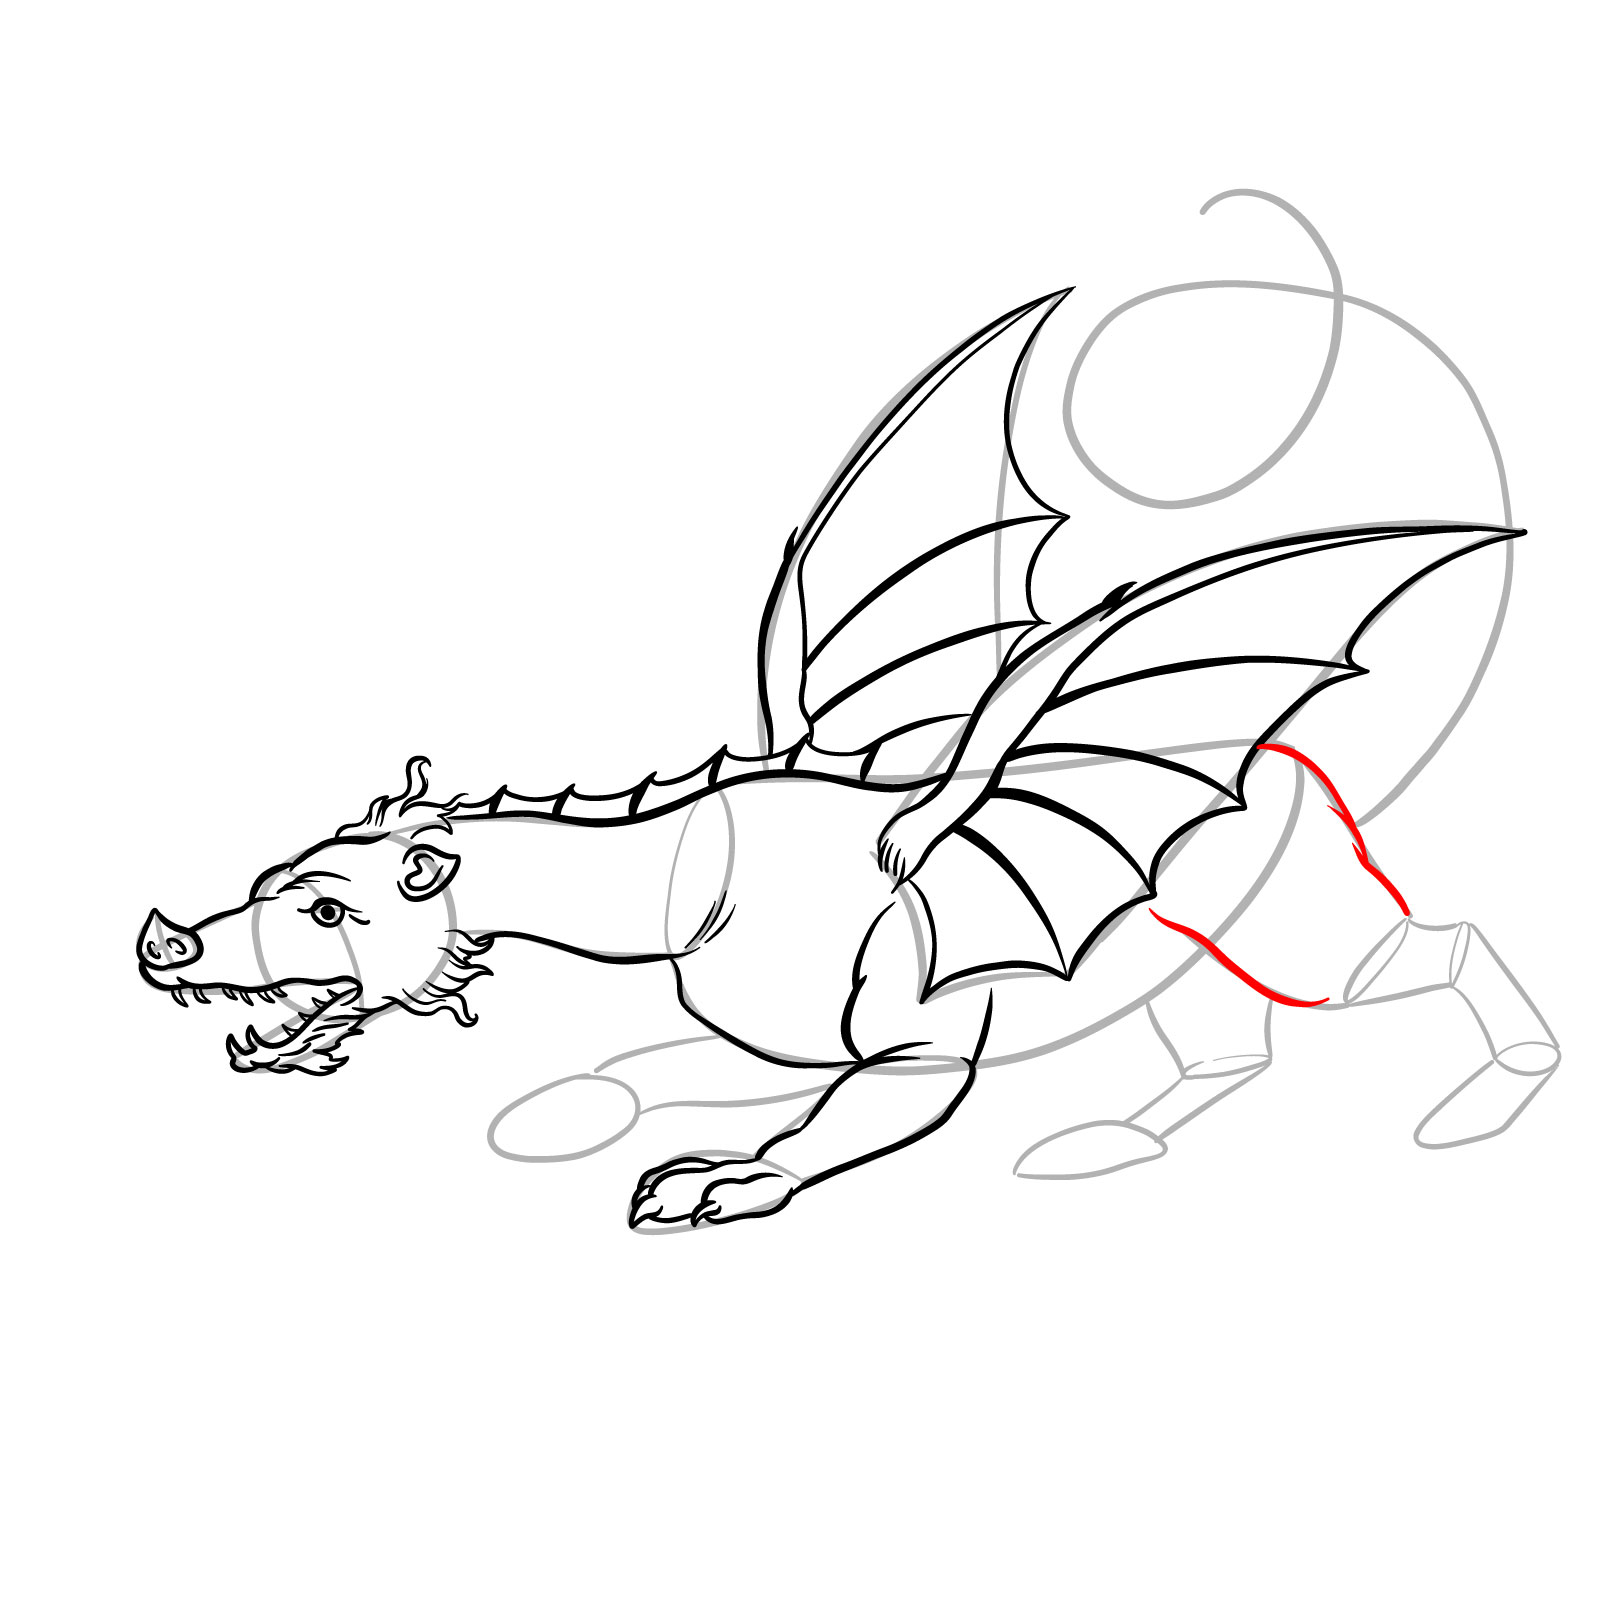 How to draw a classic European dragon - step 29